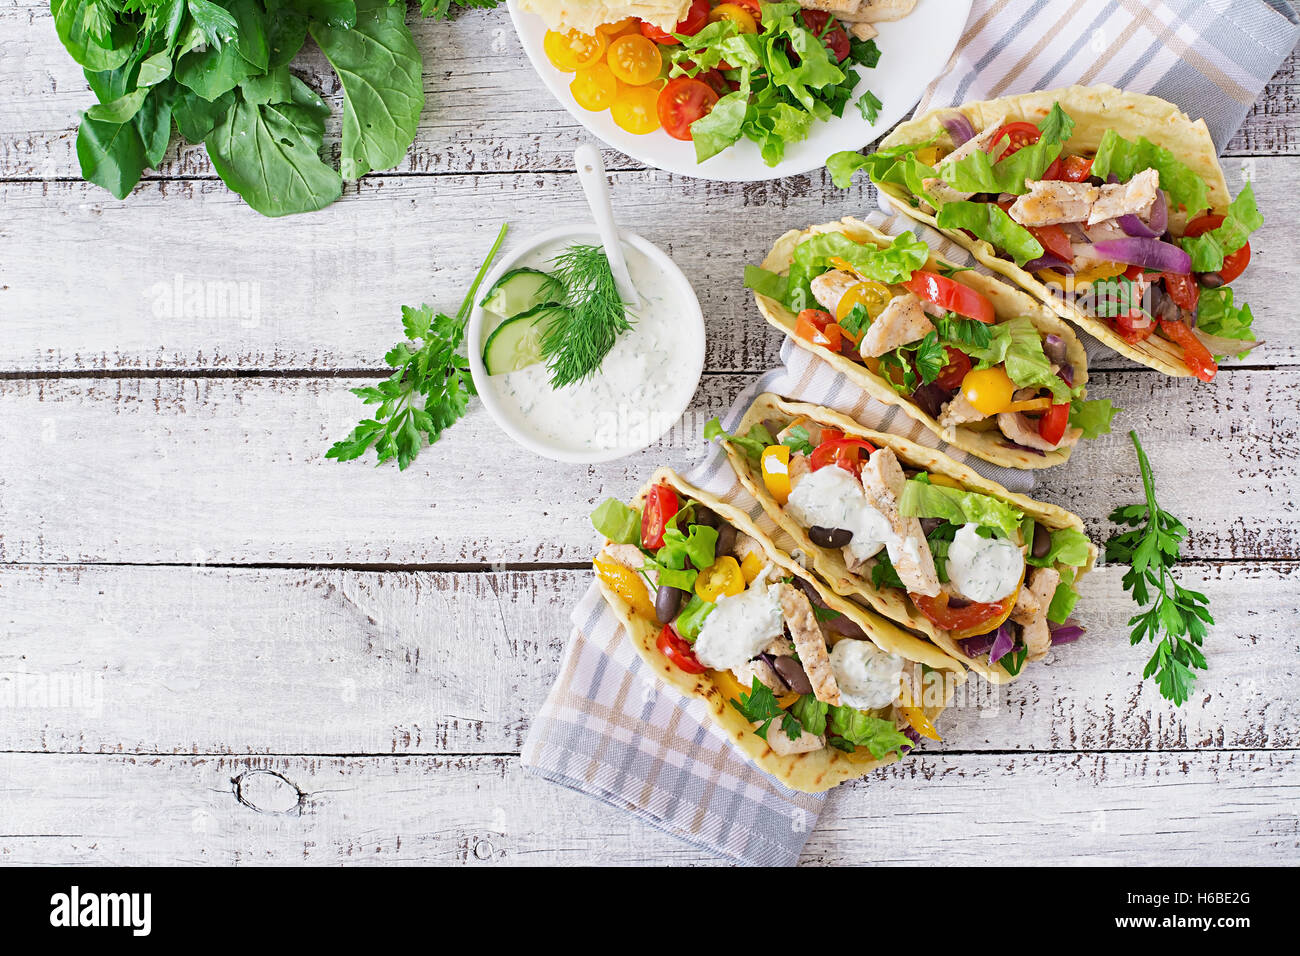 Mexican tacos with chicken, bell peppers, black beans and fresh vegetables and tartar sauce. Top view Stock Photo